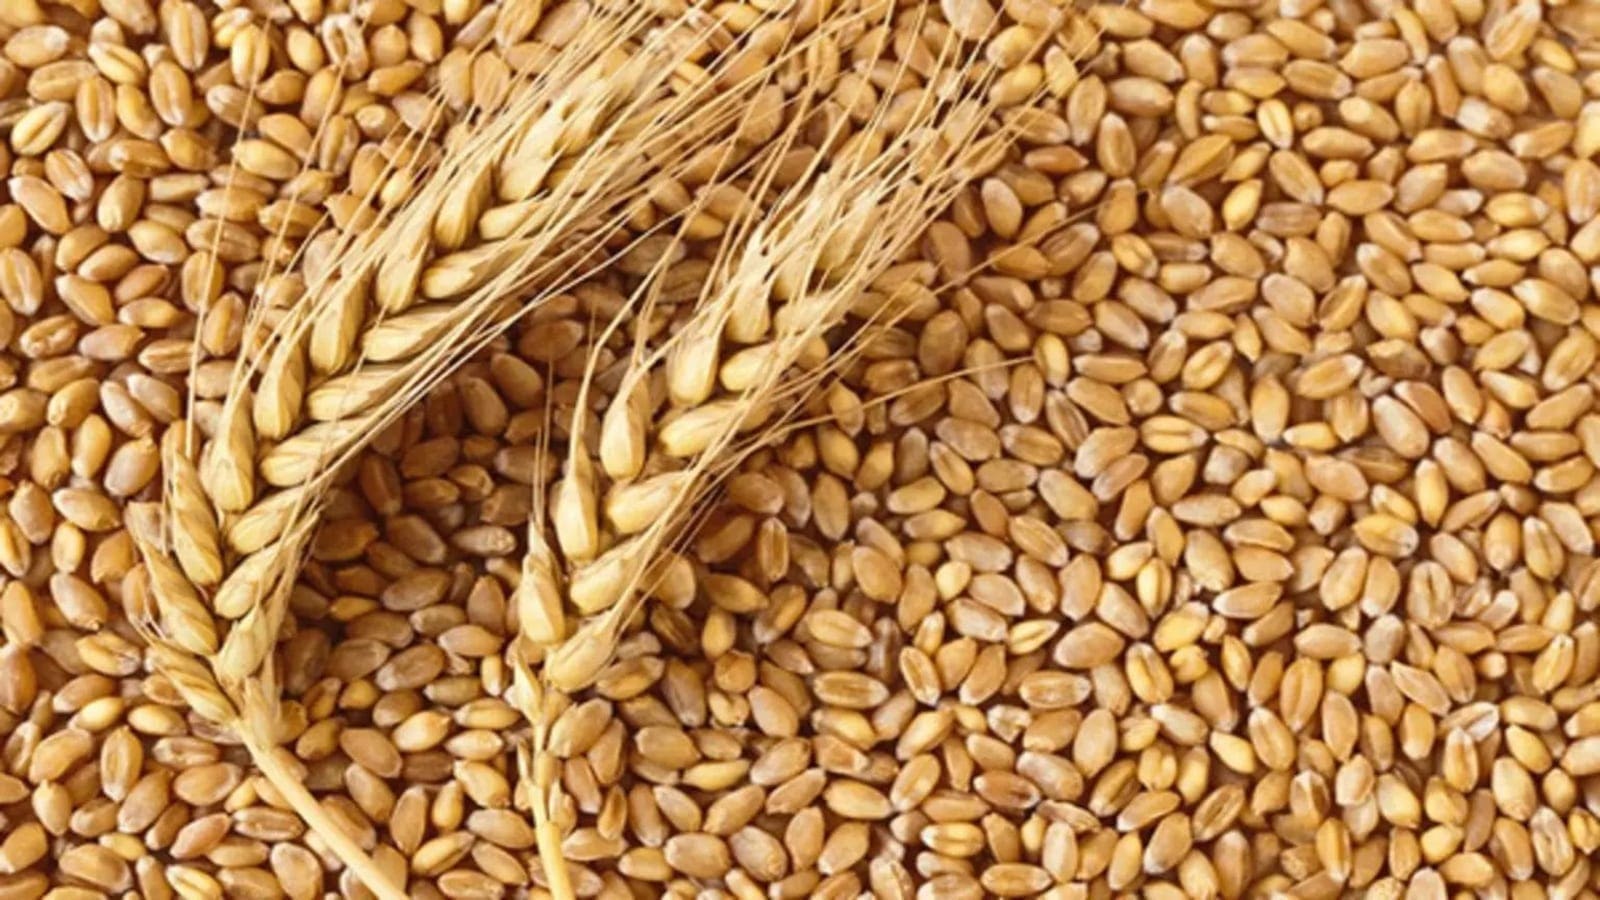 US wheat exports to hit 51-year low due to high prices, low supply